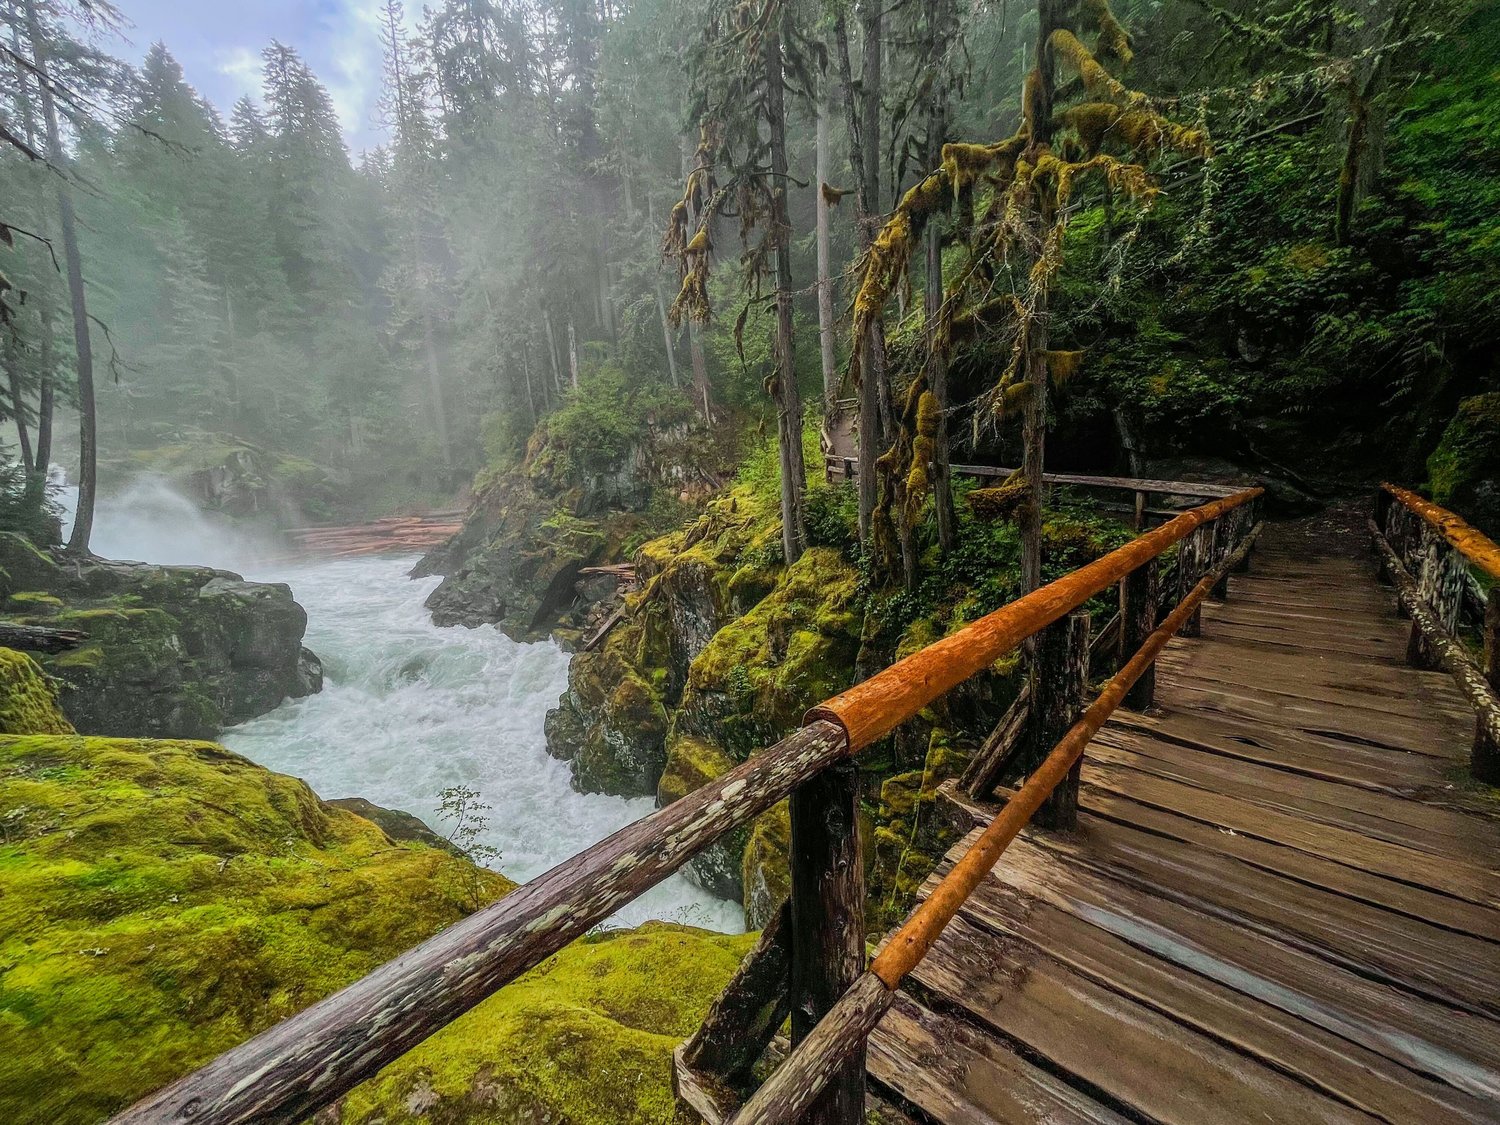 A wooden bridges stretches over the Ohannapecosh River near Silver Falls in Mount Rainier National Park on Sunday, June 5, 2022.